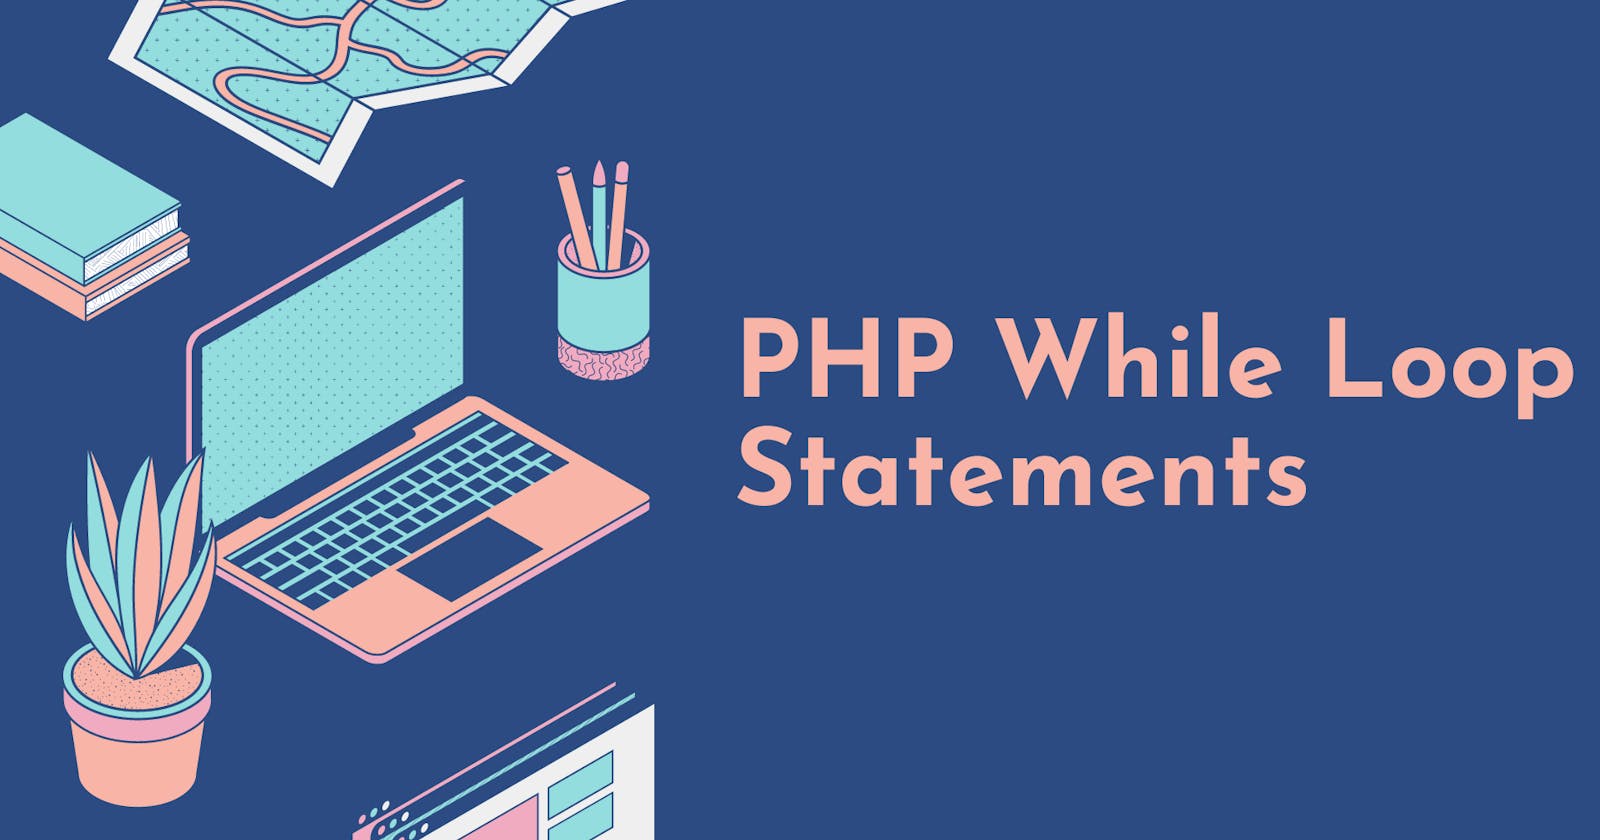 PHP While Loop Statements